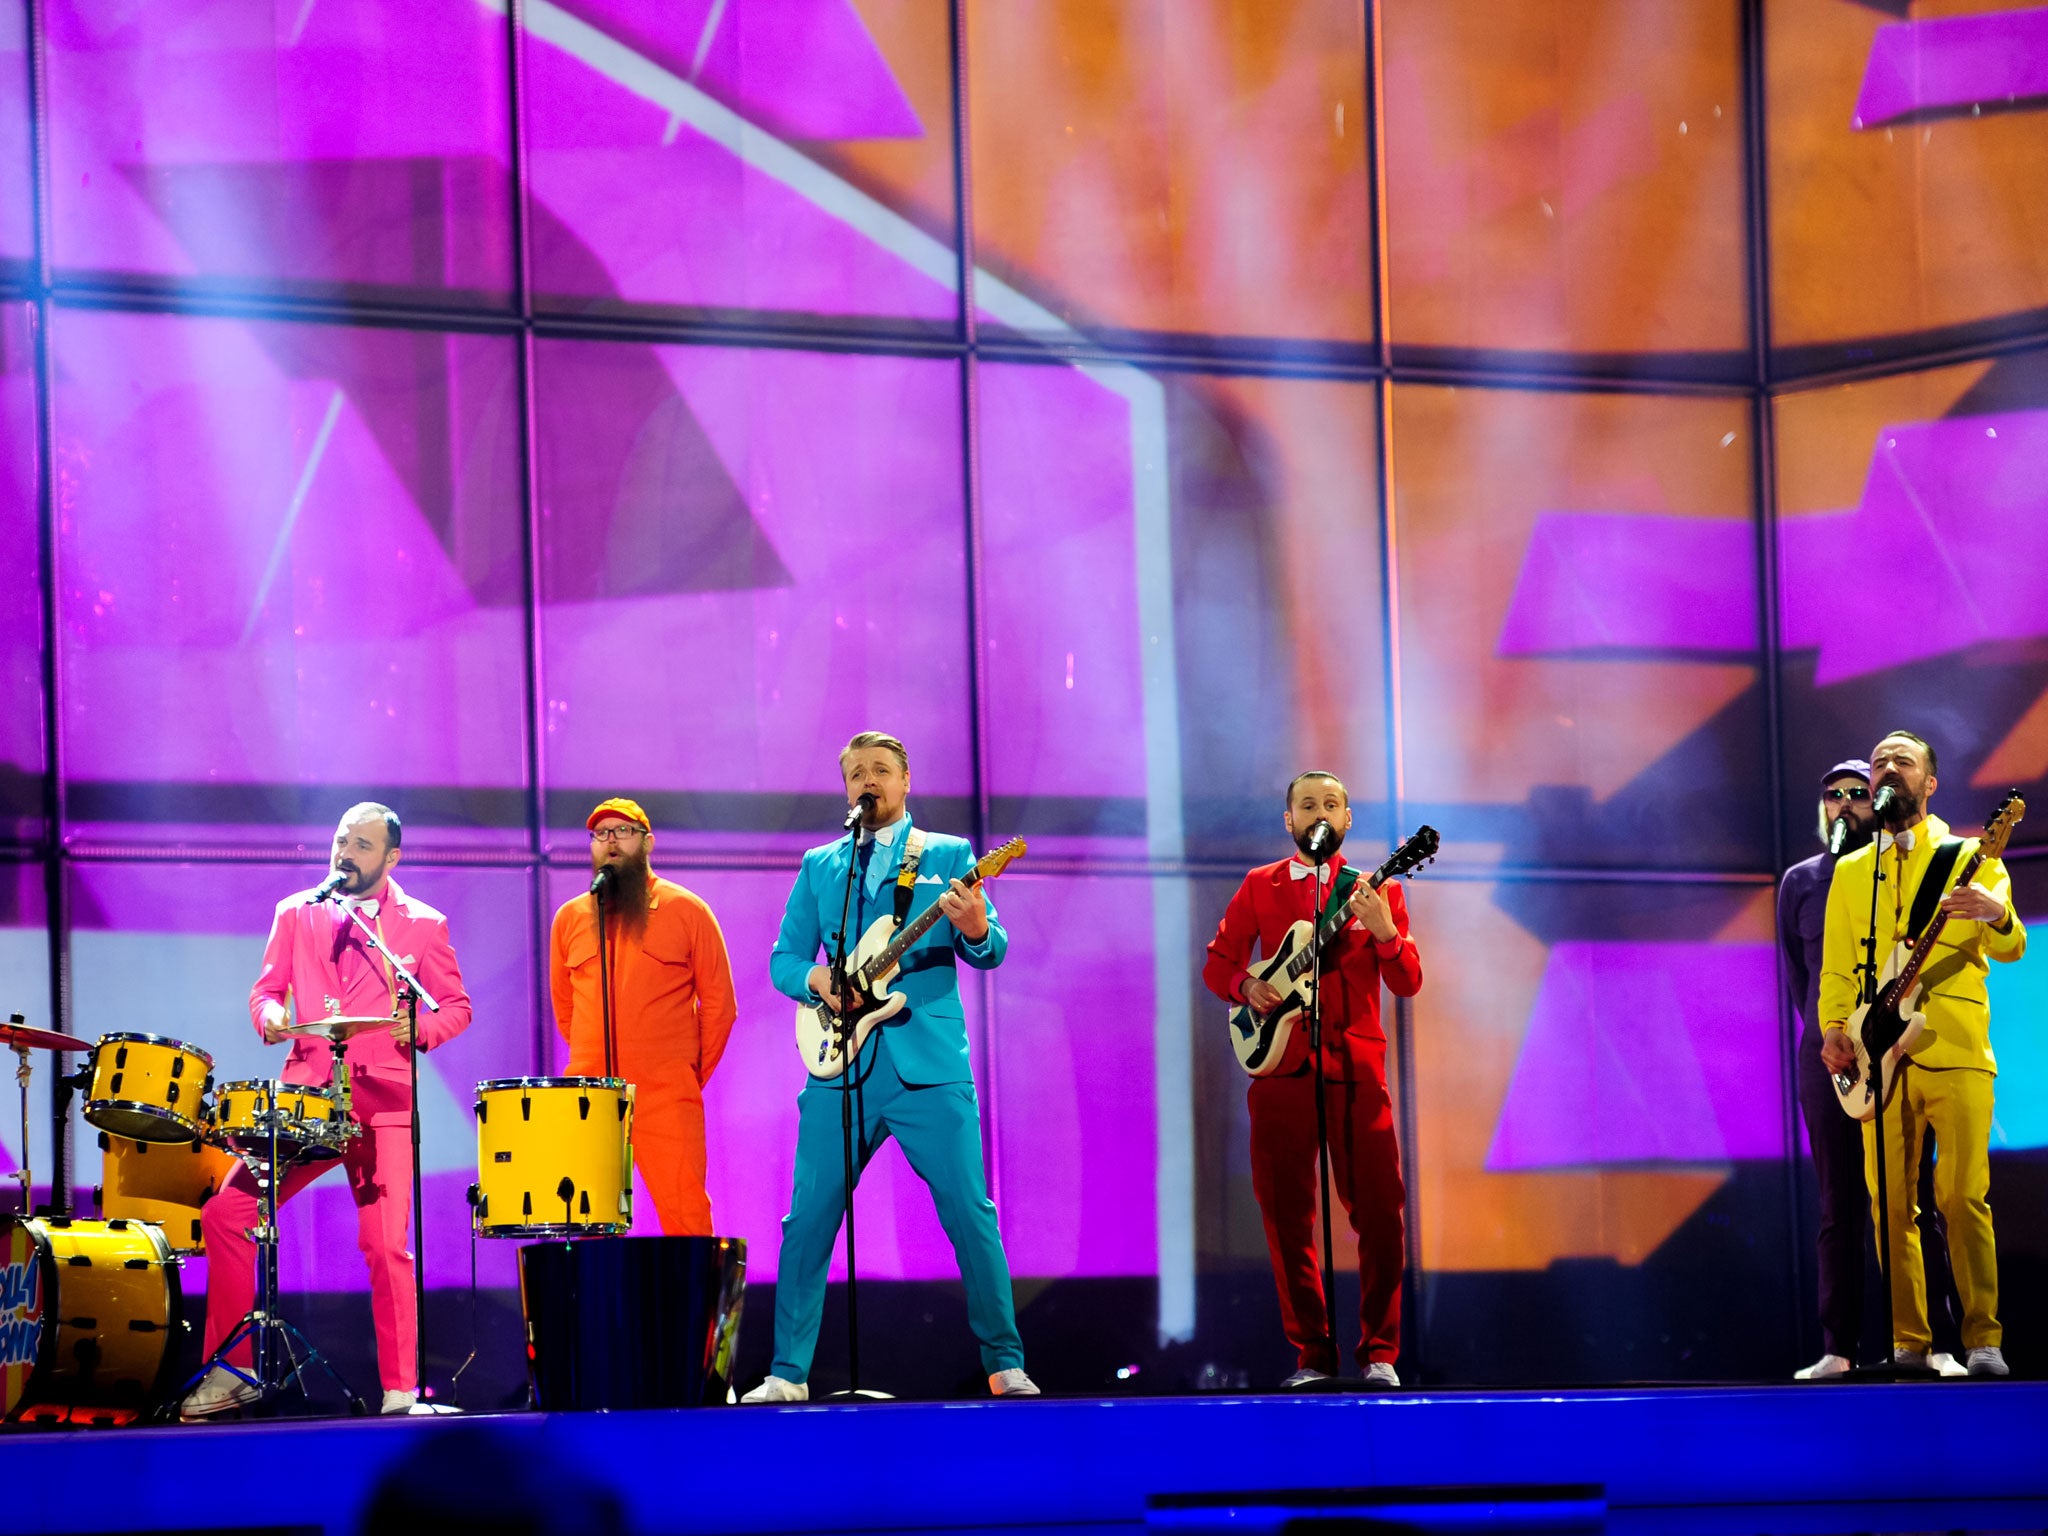 A dress rehearsal of the First Semi-Final for the Eurovision Song Contest in Copenhagen, Denmark